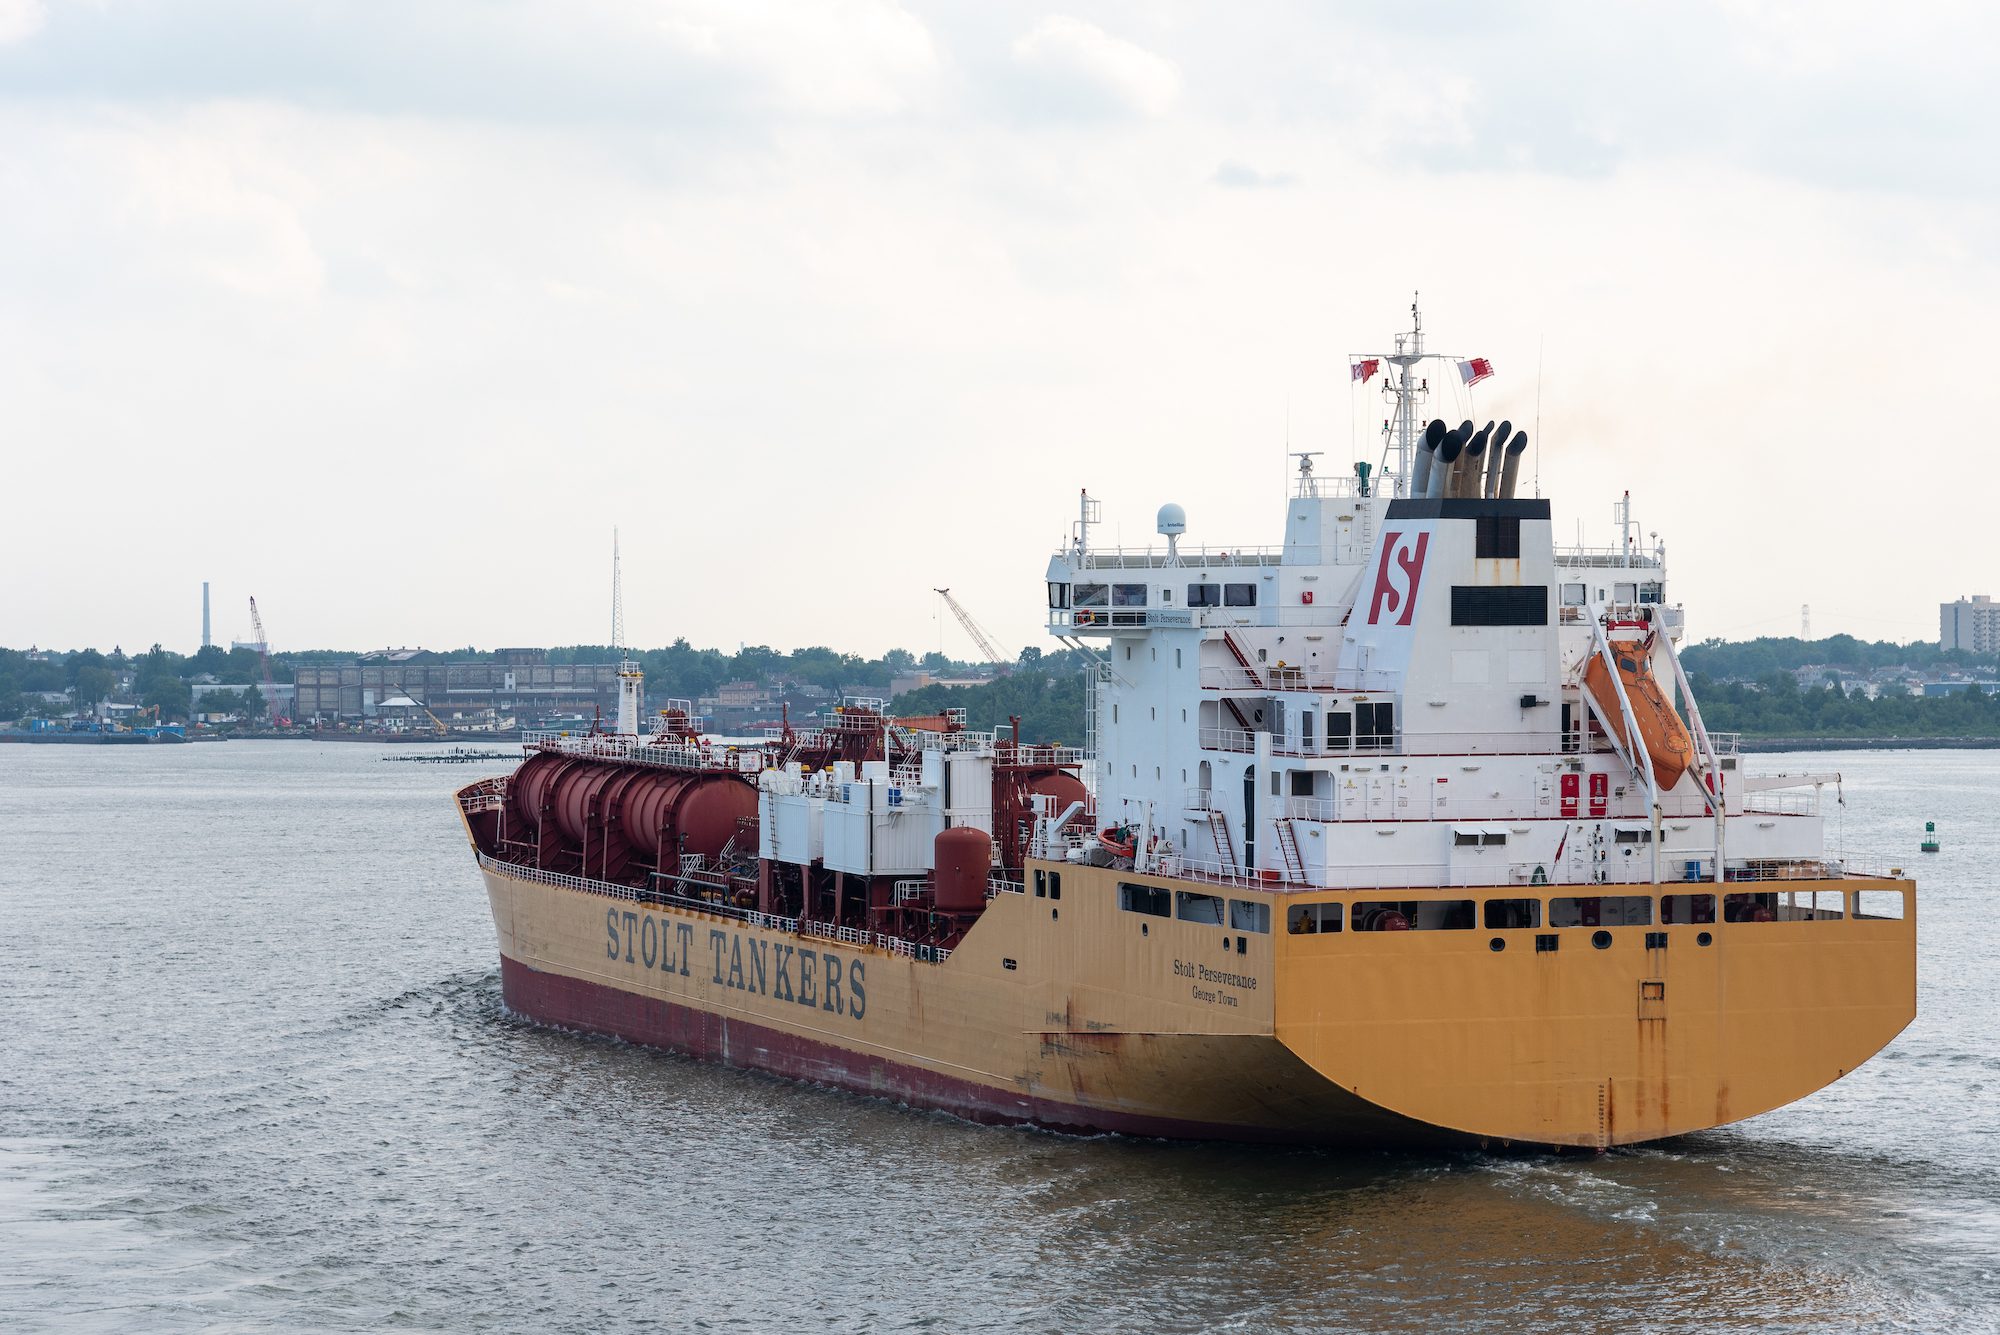 File photo of a Stolt tanker departing Newark, New Jersey.